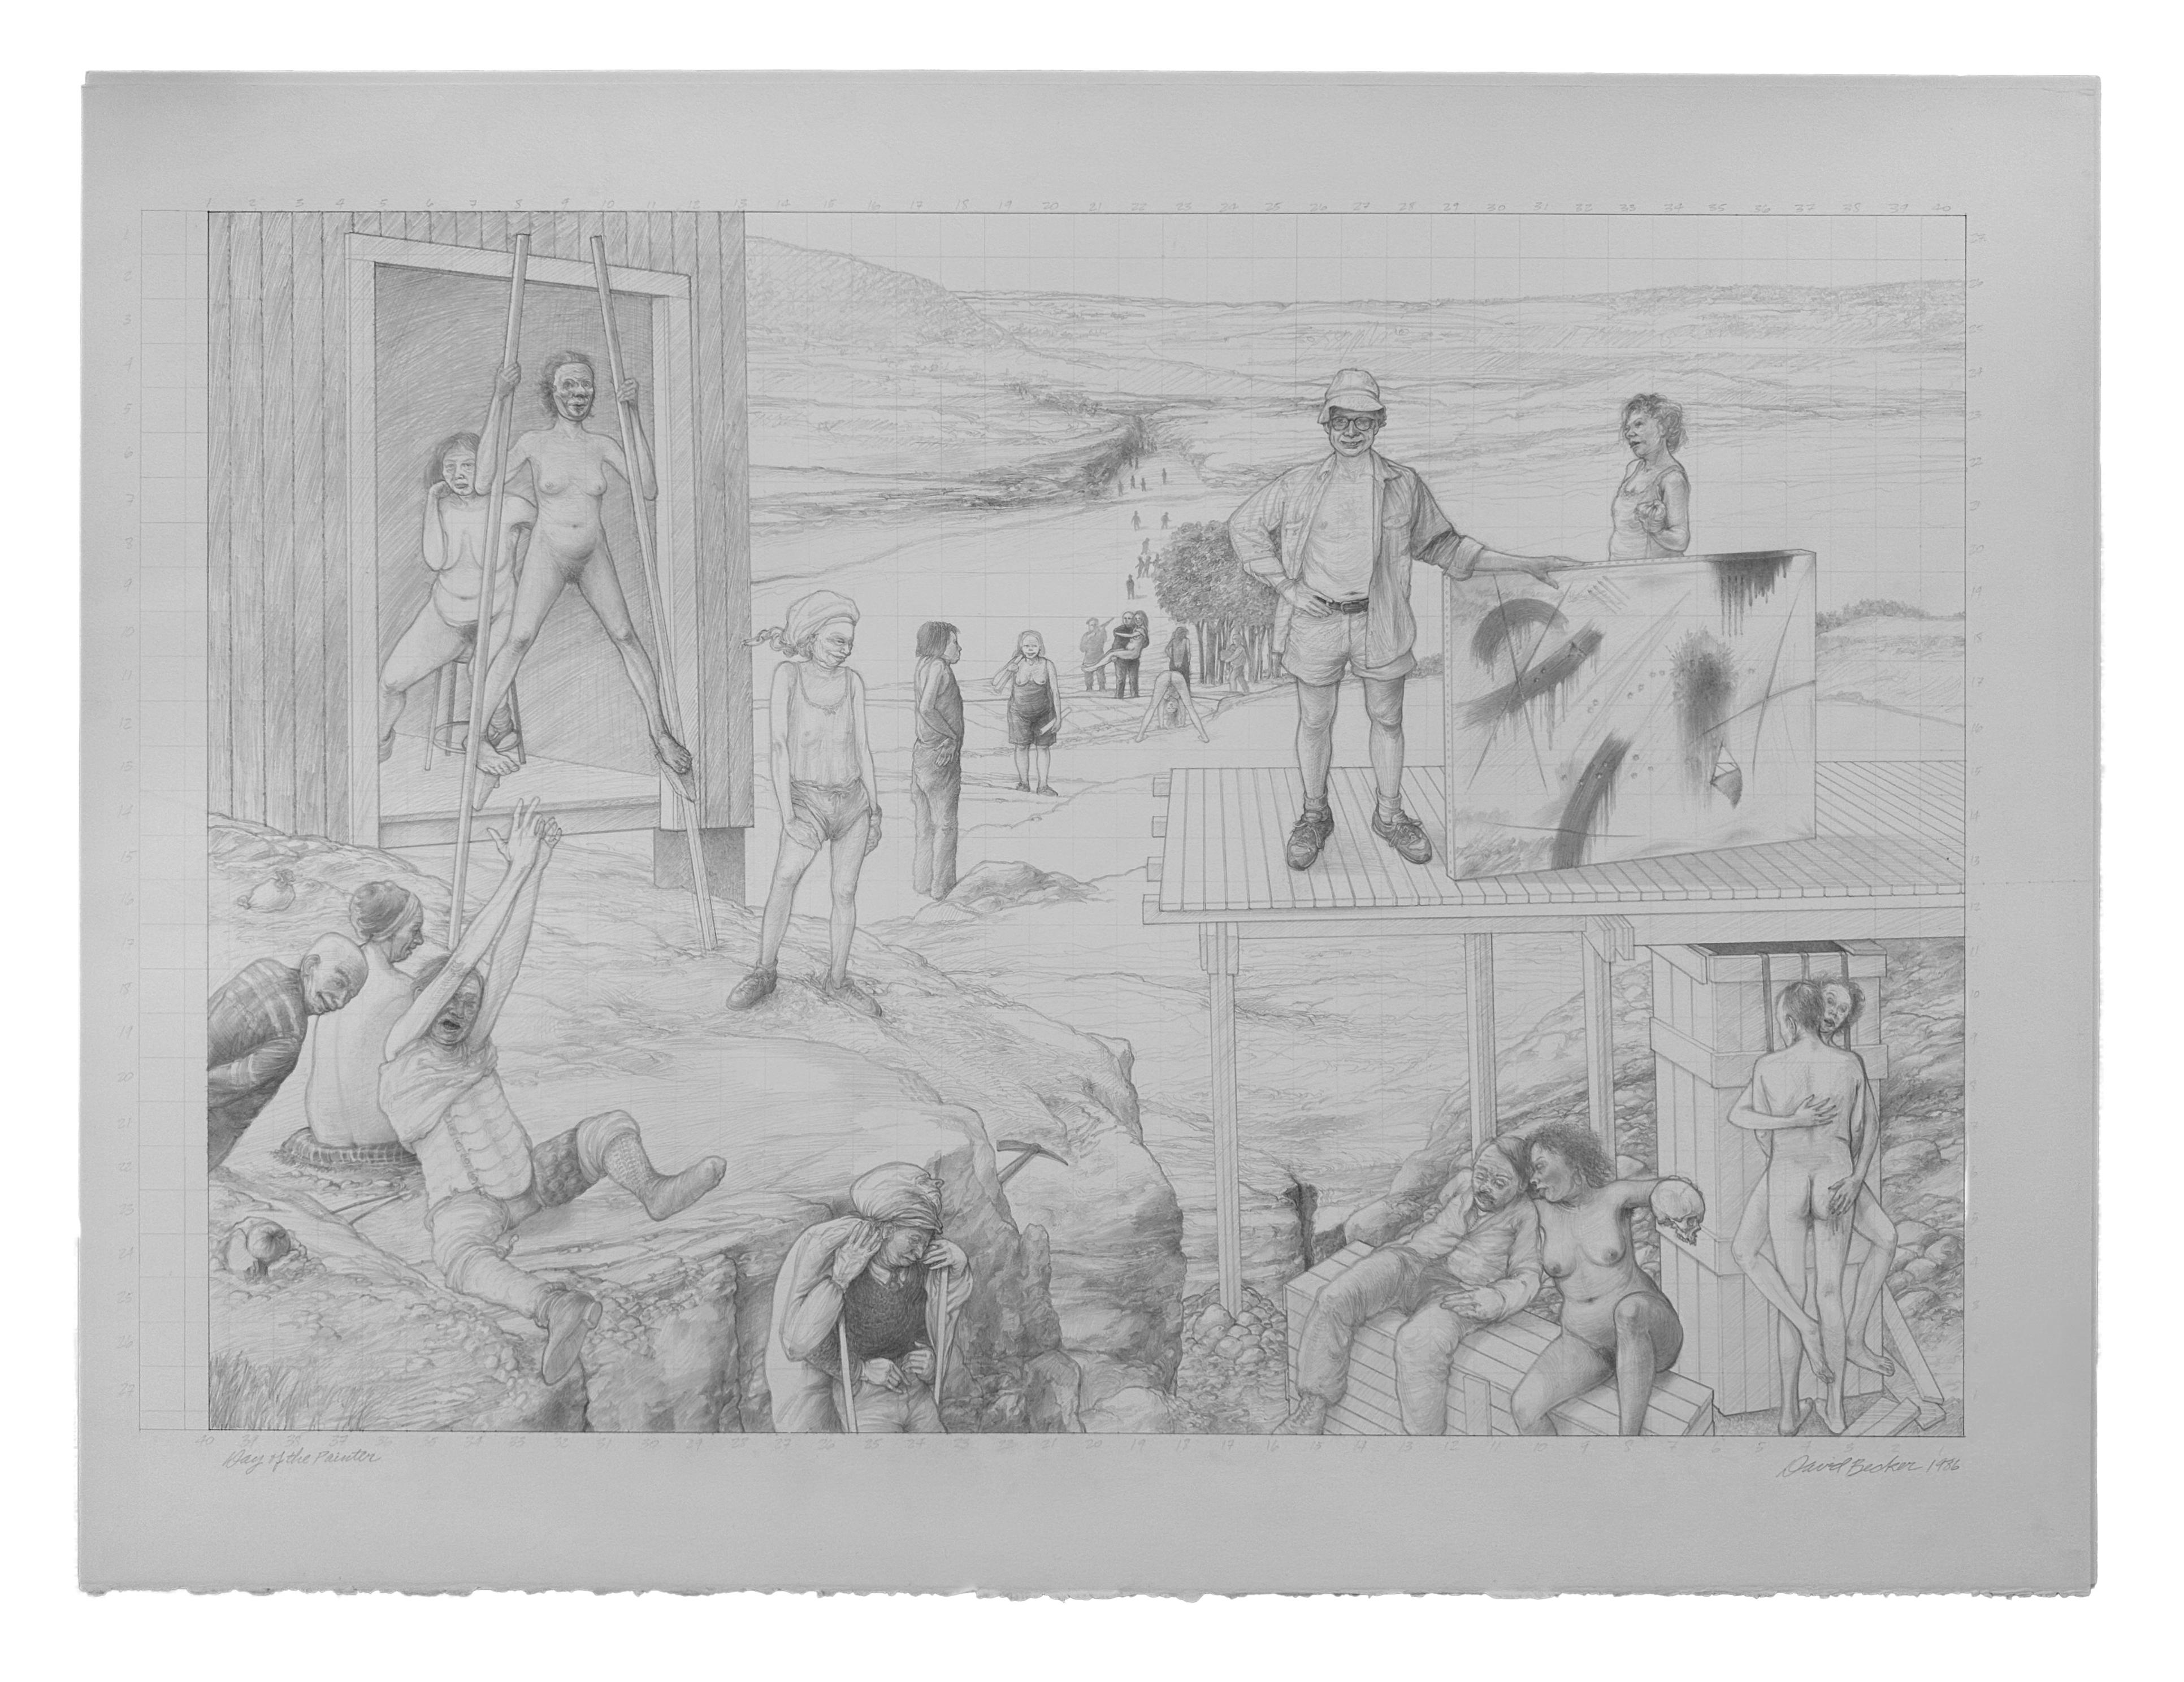 Day of the Painter - Allegorical Drawing  with the Artist and Multiple Figures